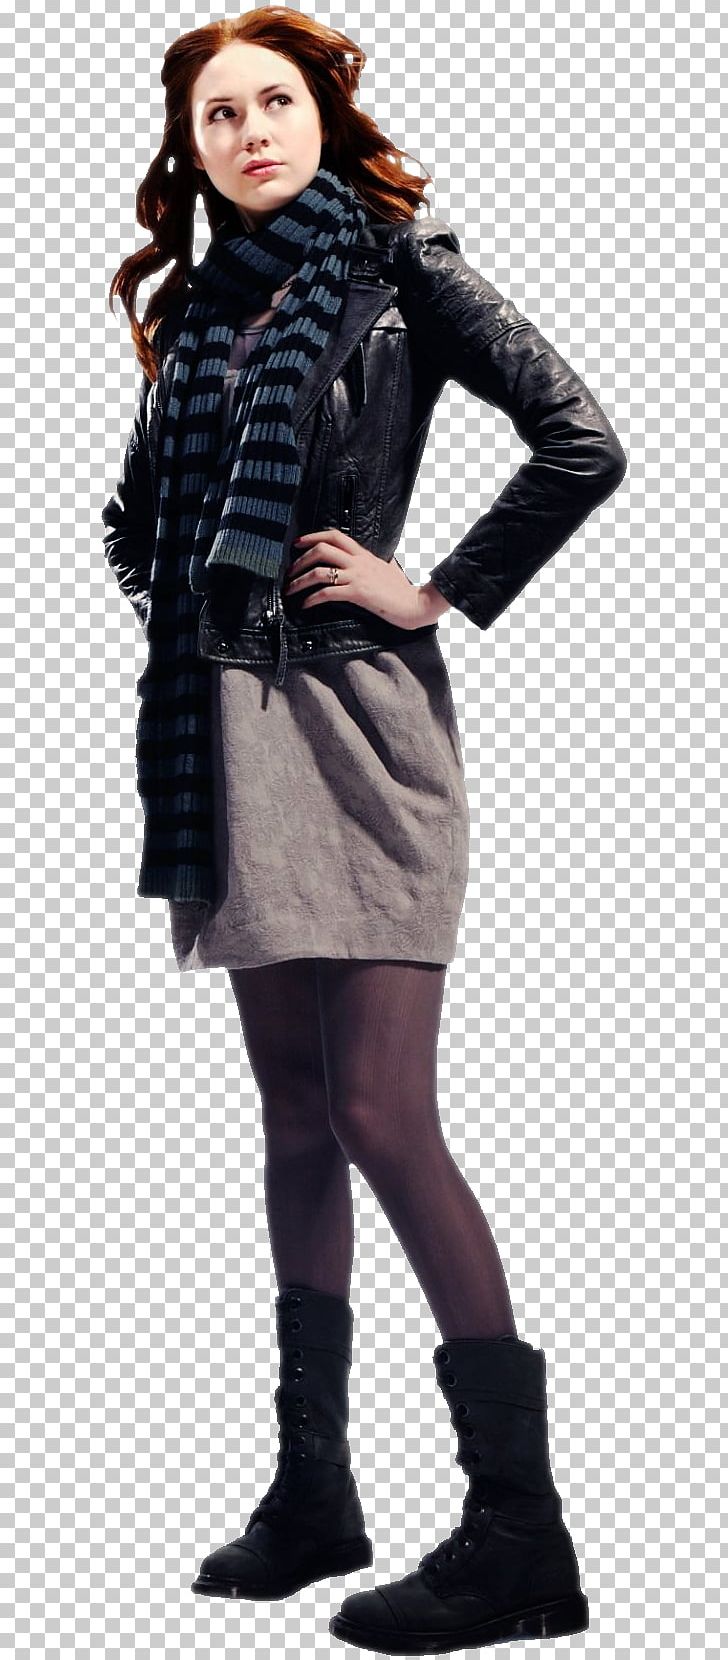 Karen Gillan Doctor Who Amy Pond Rory Williams Eleventh Doctor PNG, Clipart, Celebrities, Clara Oswald, Coat, Doctor, Doctor Who Free PNG Download